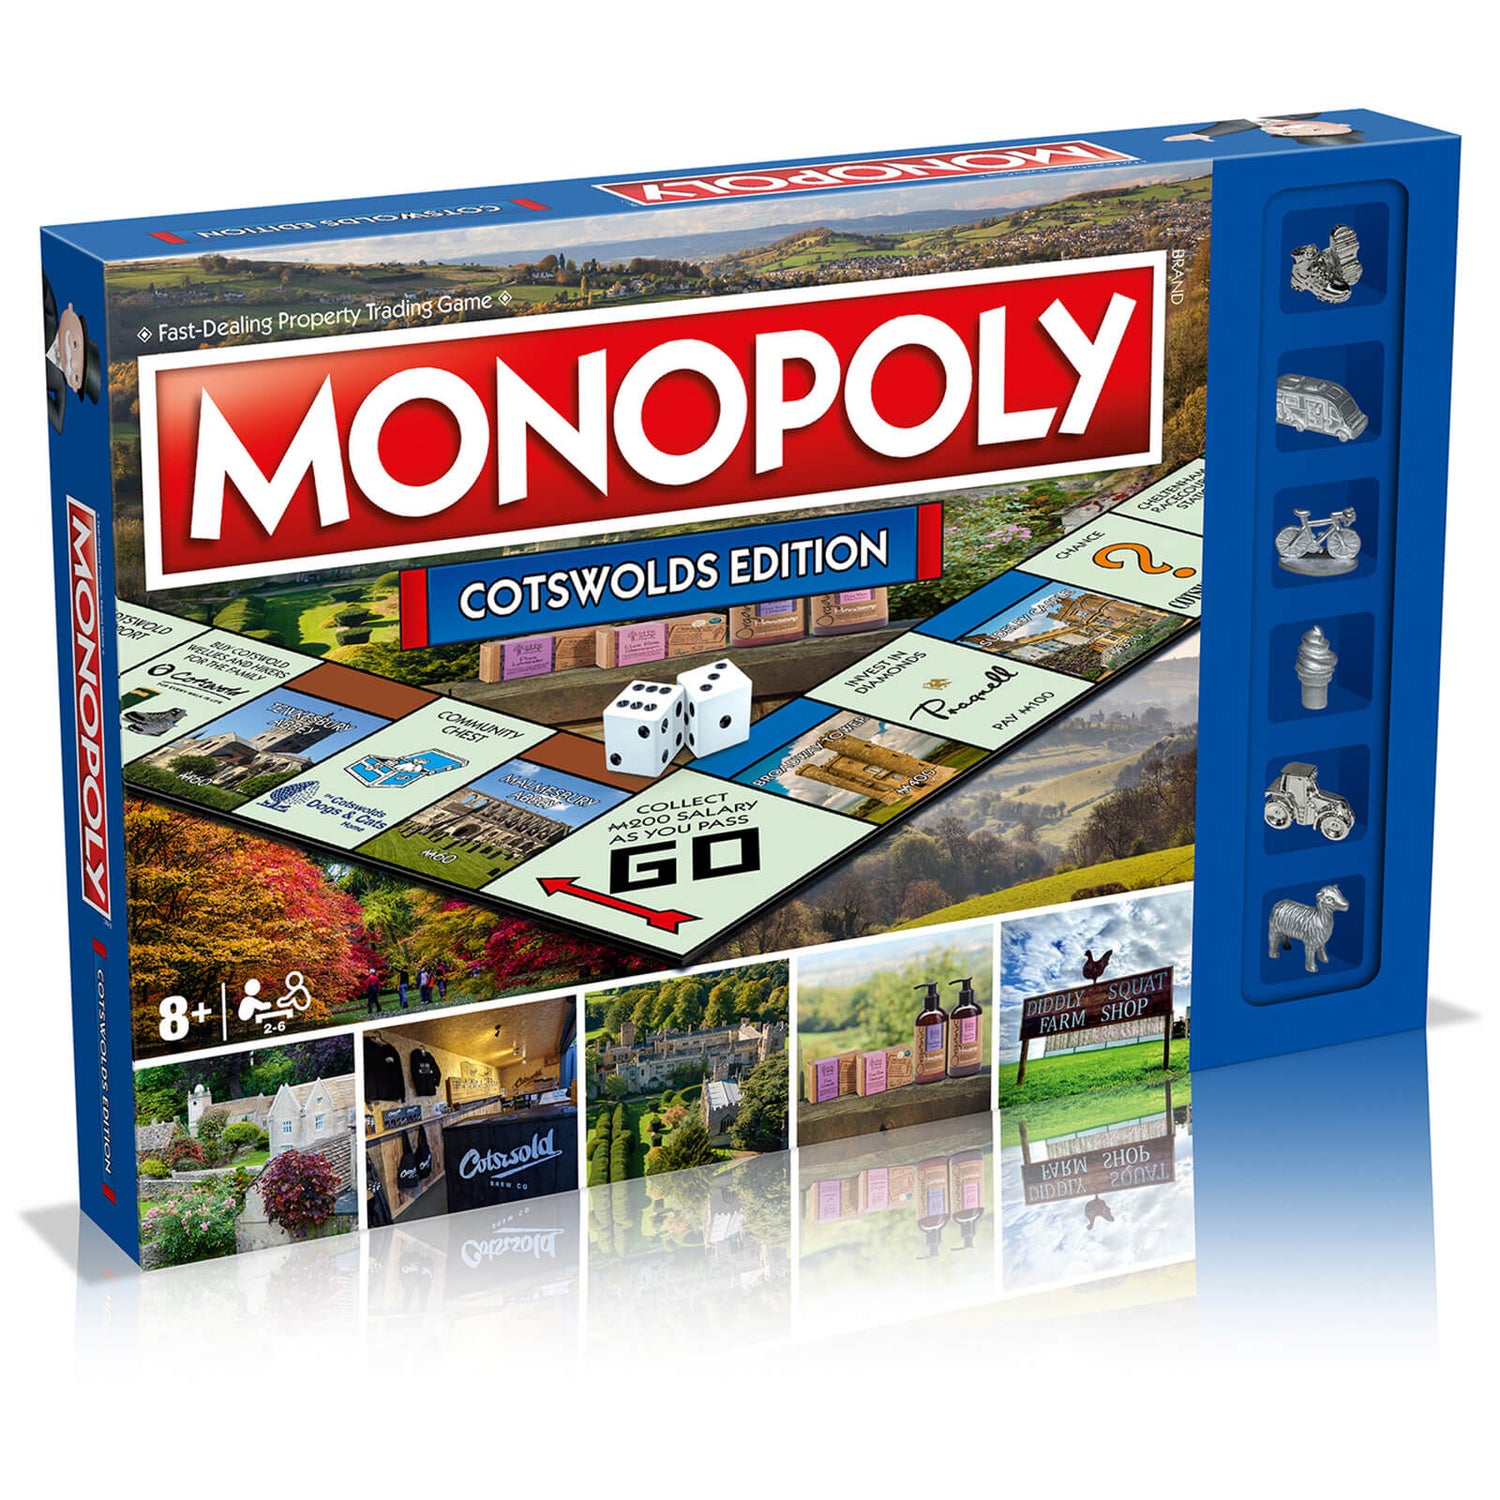 Monopoly Board Game - Cotswolds Regional Edition